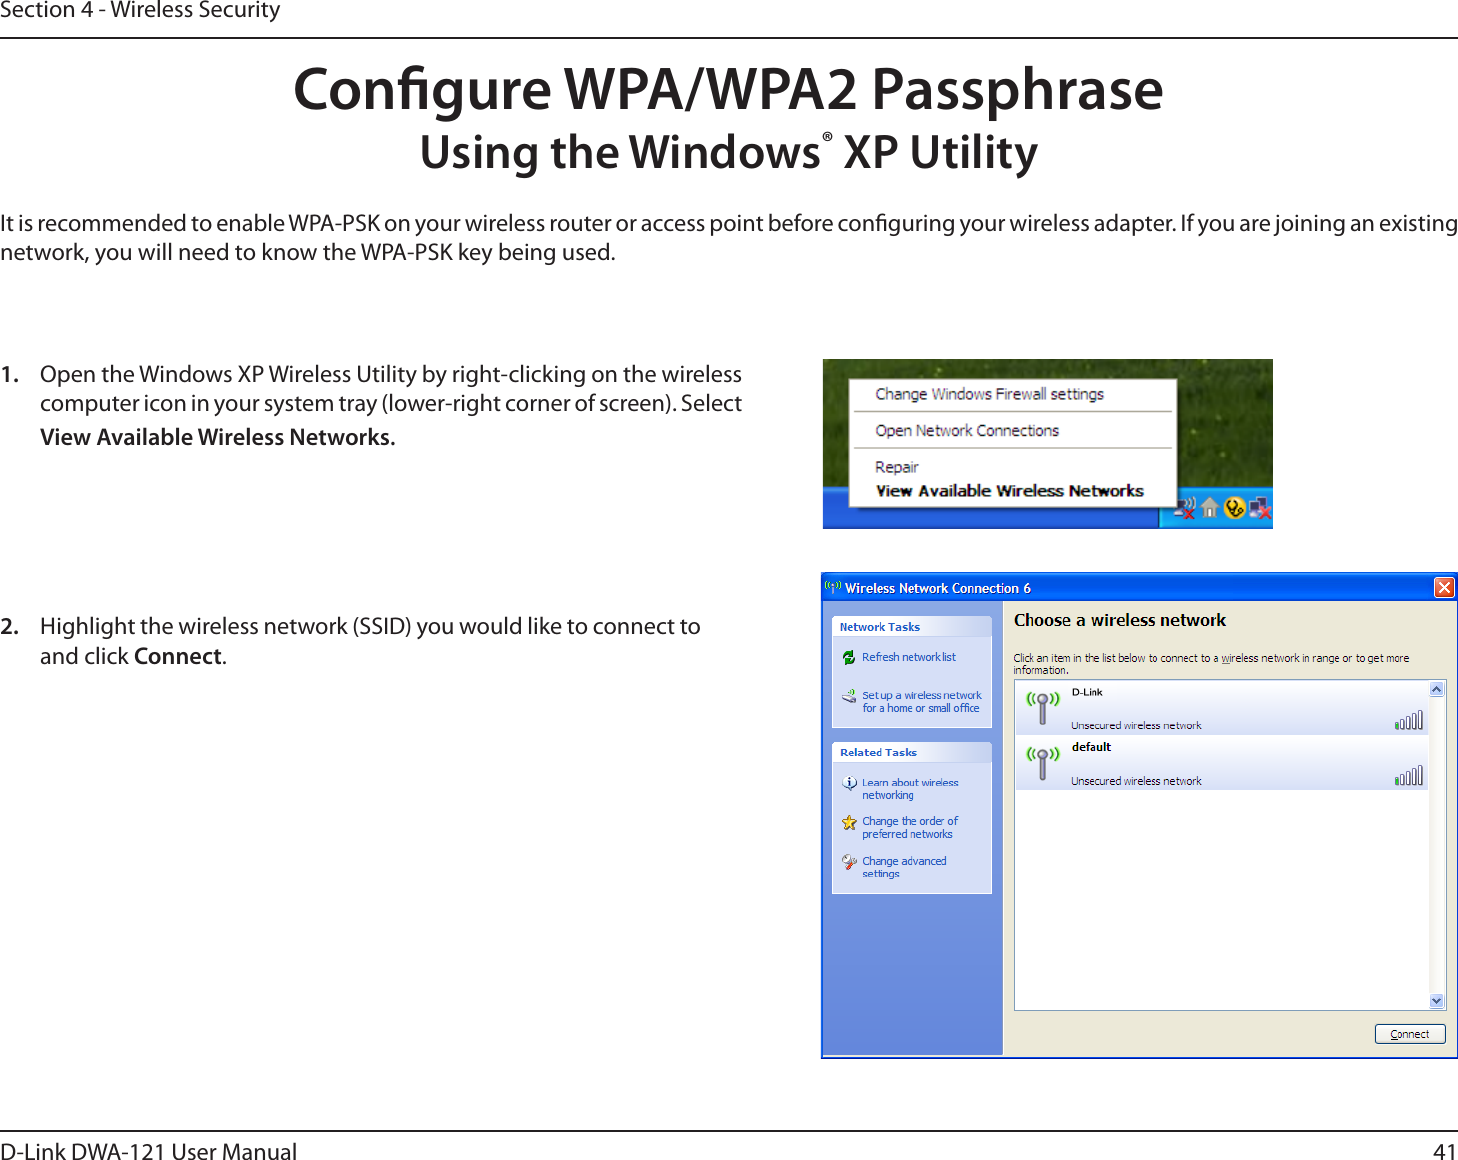 41D-Link DWA-121 User ManualSection 4 - Wireless SecurityCongure WPA/WPA2 PassphraseUsing the Windows® XP UtilityIt is recommended to enable WPA-PSK on your wireless router or access point before conguring your wireless adapter. If you are joining an existing network, you will need to know the WPA-PSK key being used.2.  Highlight the wireless network (SSID) you would like to connect to and click Connect.1.  Open the Windows XP Wireless Utility by right-clicking on the wireless computer icon in your system tray (lower-right corner of screen). Select View Available Wireless Networks. 